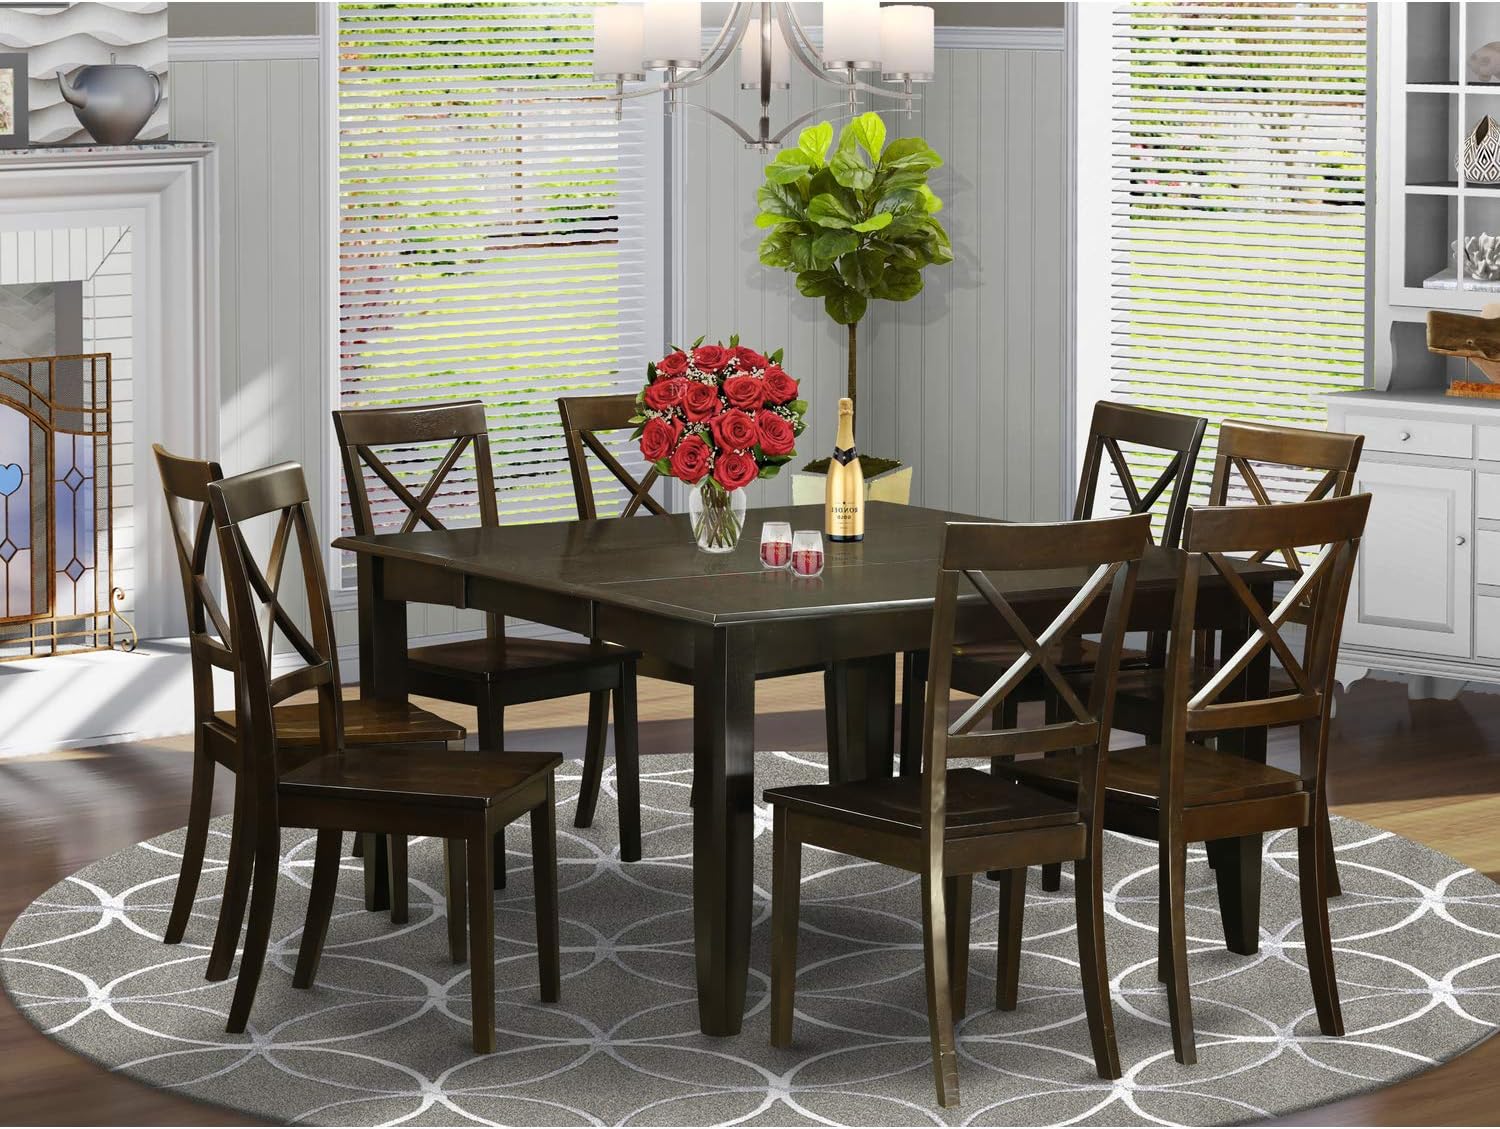 9 Pc Dining Room Kitchen Table w/ Leaf and 8 Dinette Chairs In Cappuccino